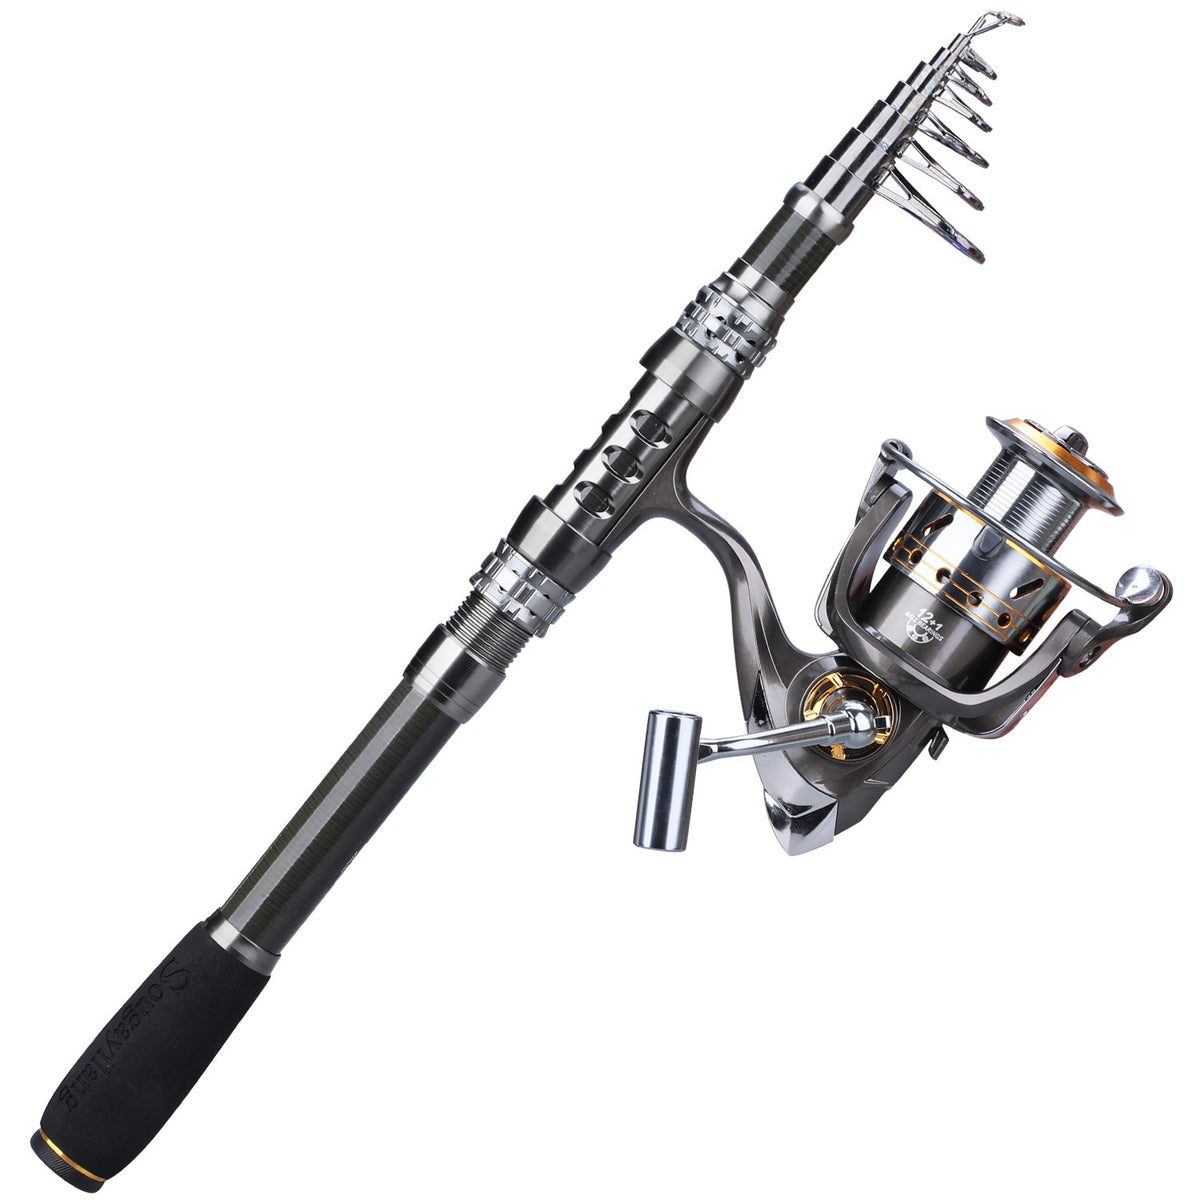 Sea Fishing Rod Kits Telescopic Rods and Spinning Reel Saltwater